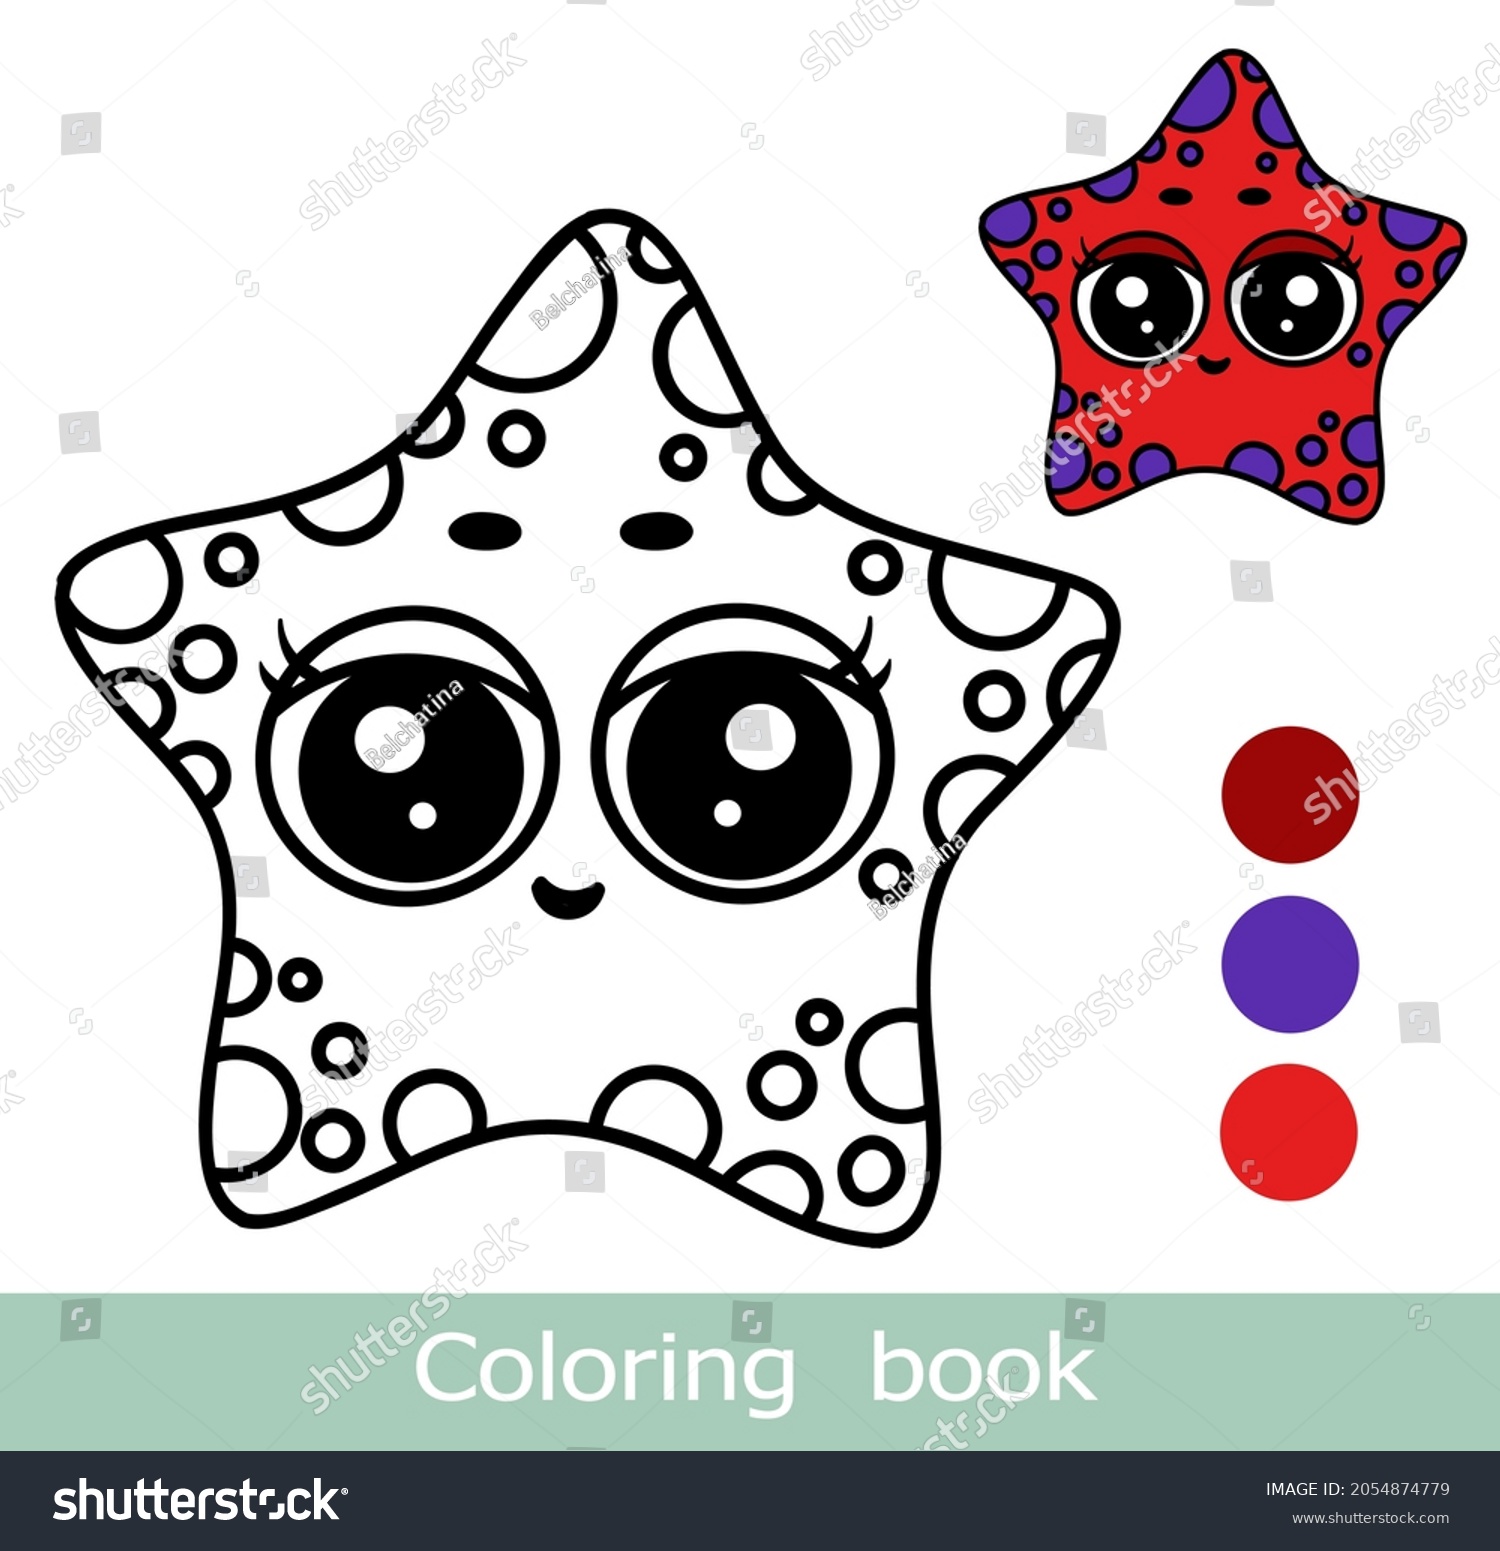 Cartoon starfish coloring book page colorful stock vector royalty free